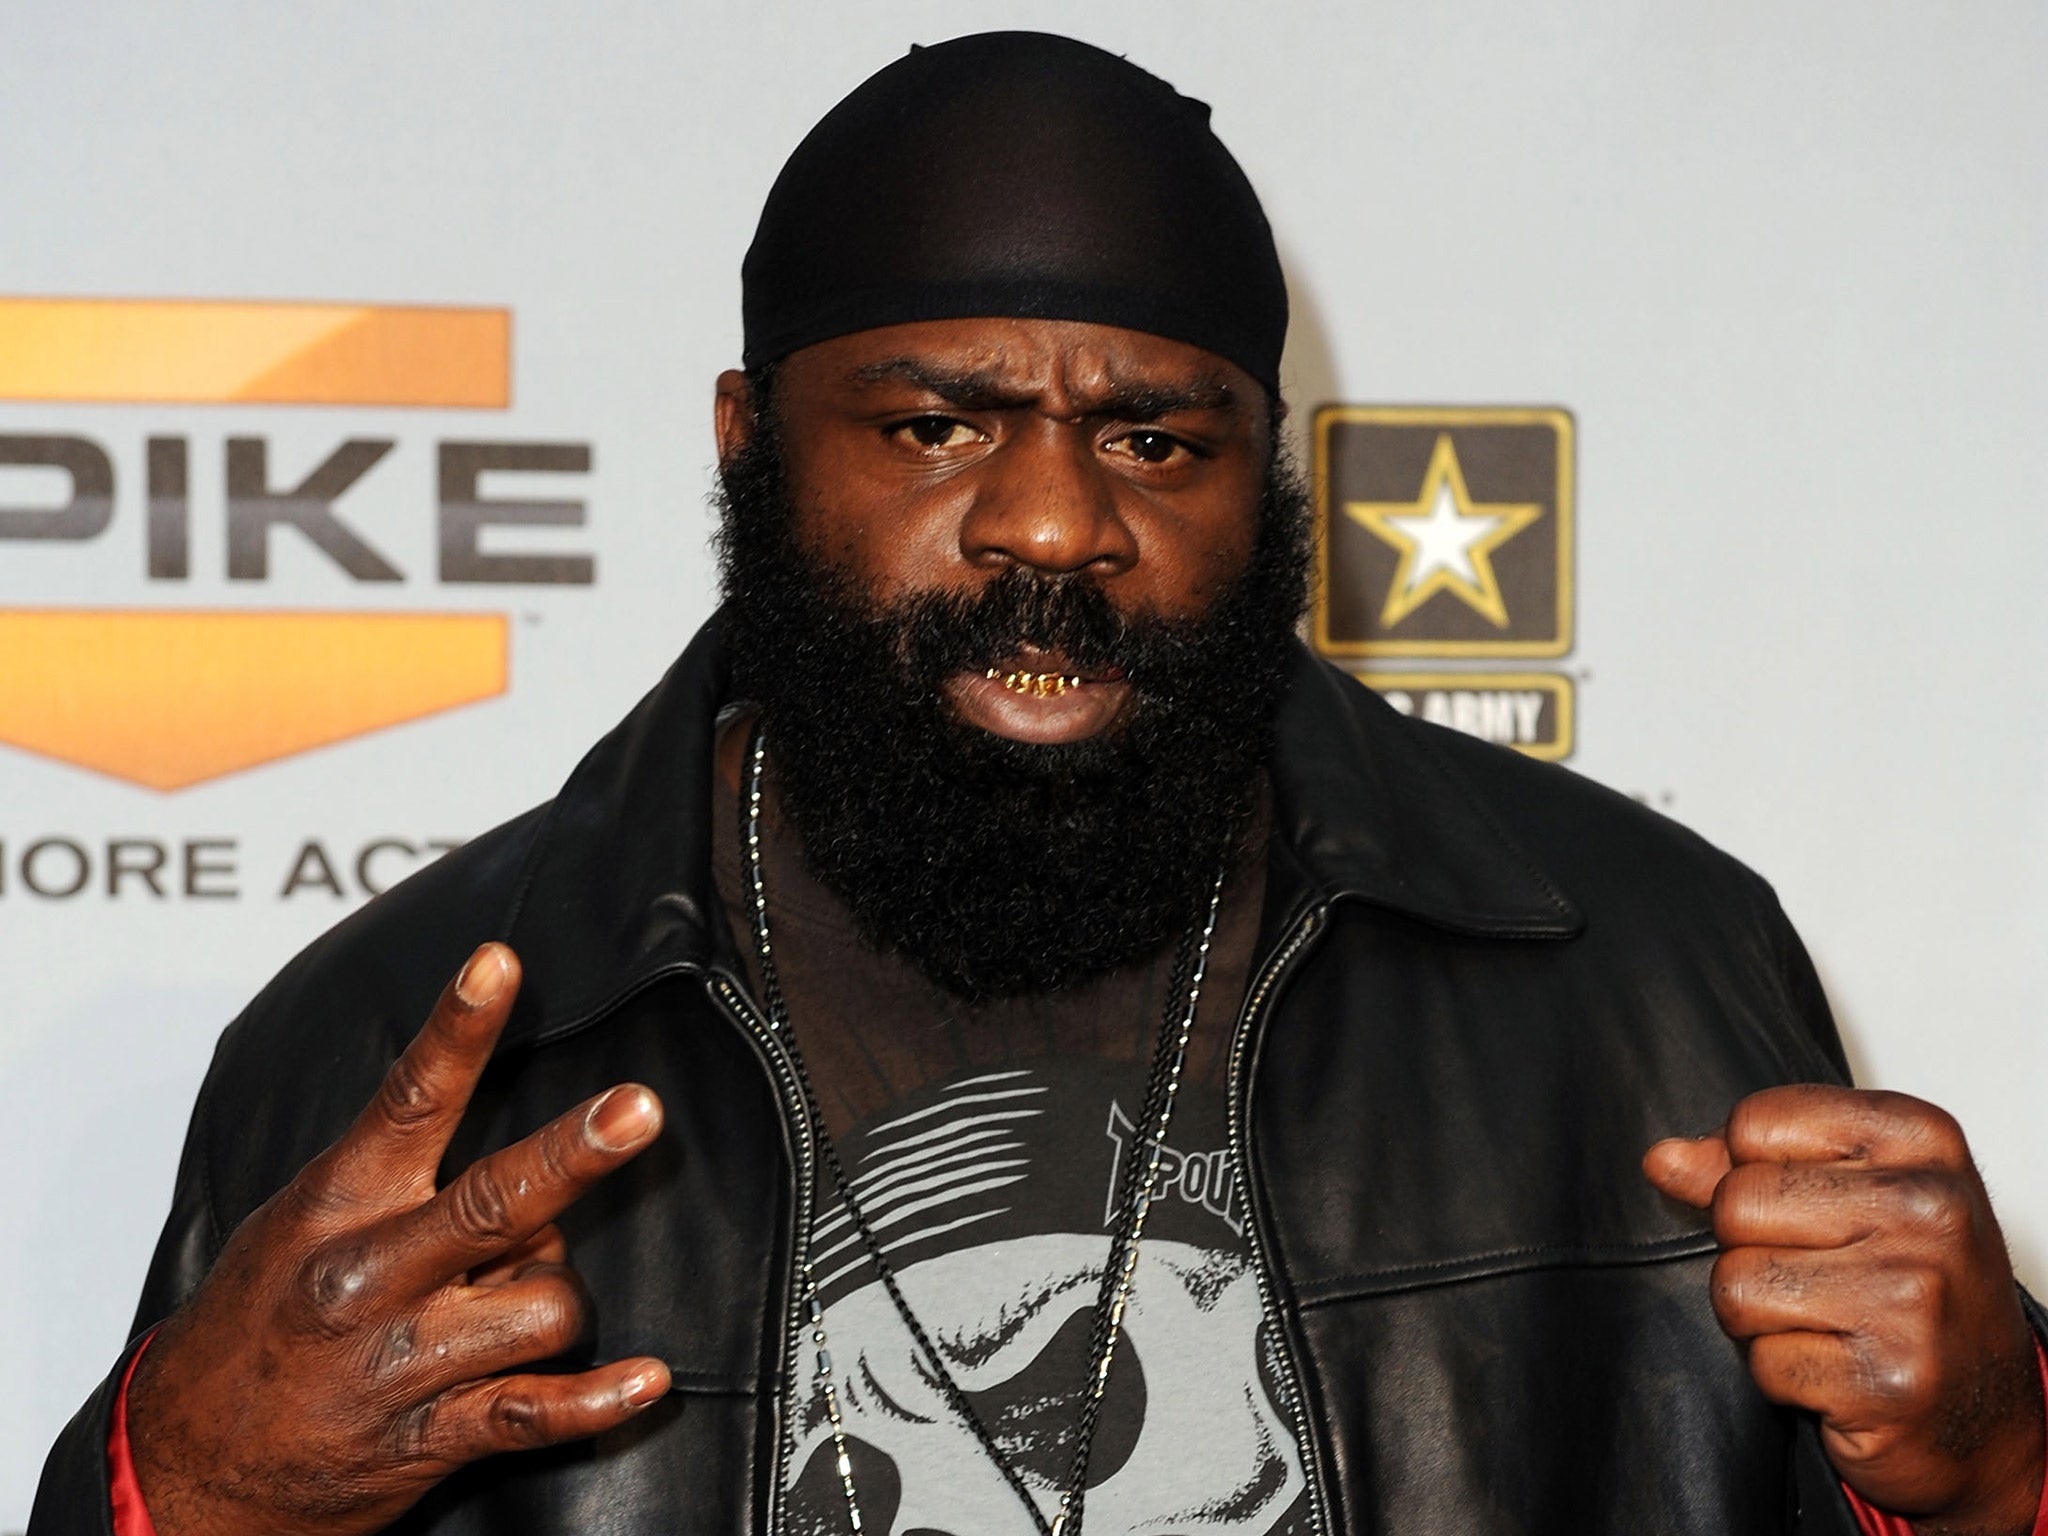 Former UFC and Bellator MMA fighter Kimbo Slice has died, aged 42